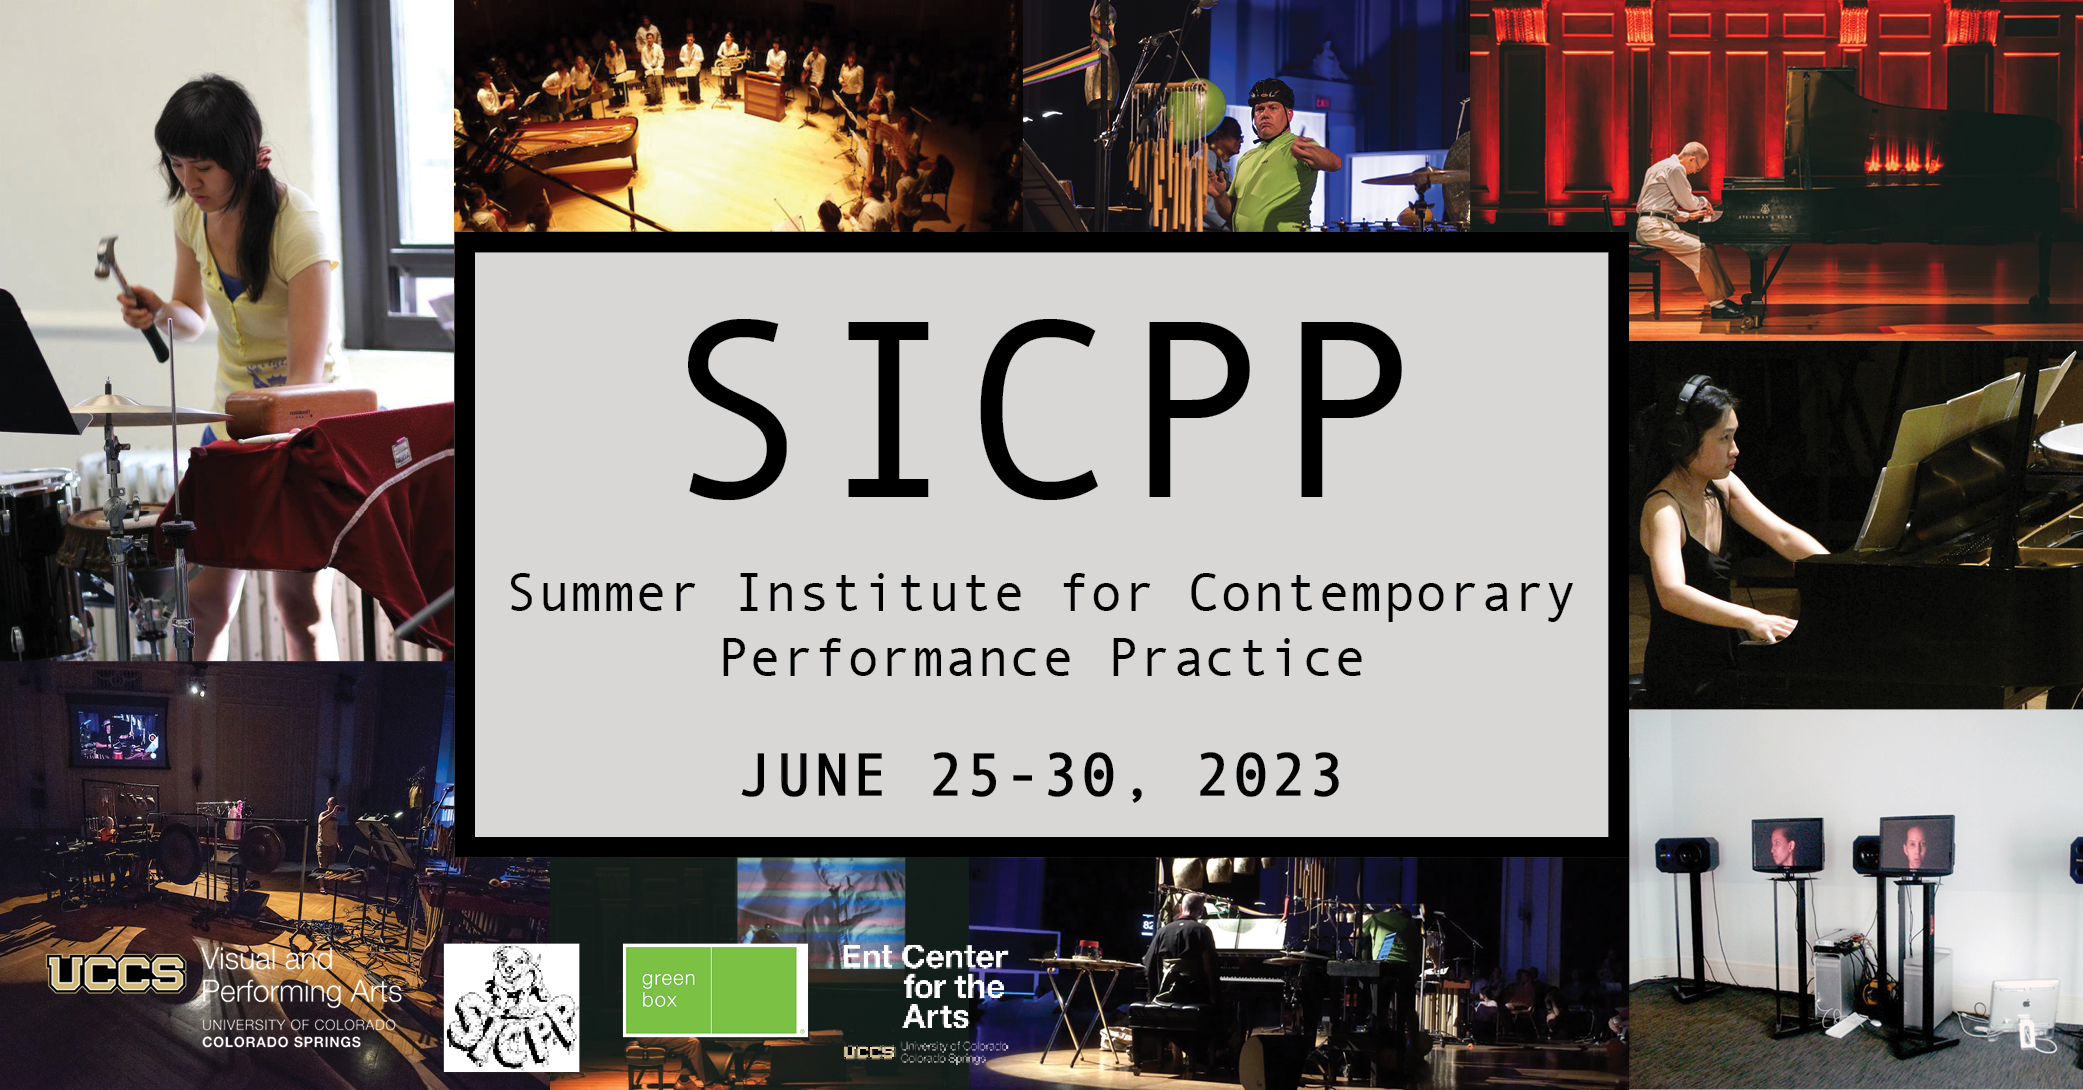 photos of past SICPP performances with text details of even in center